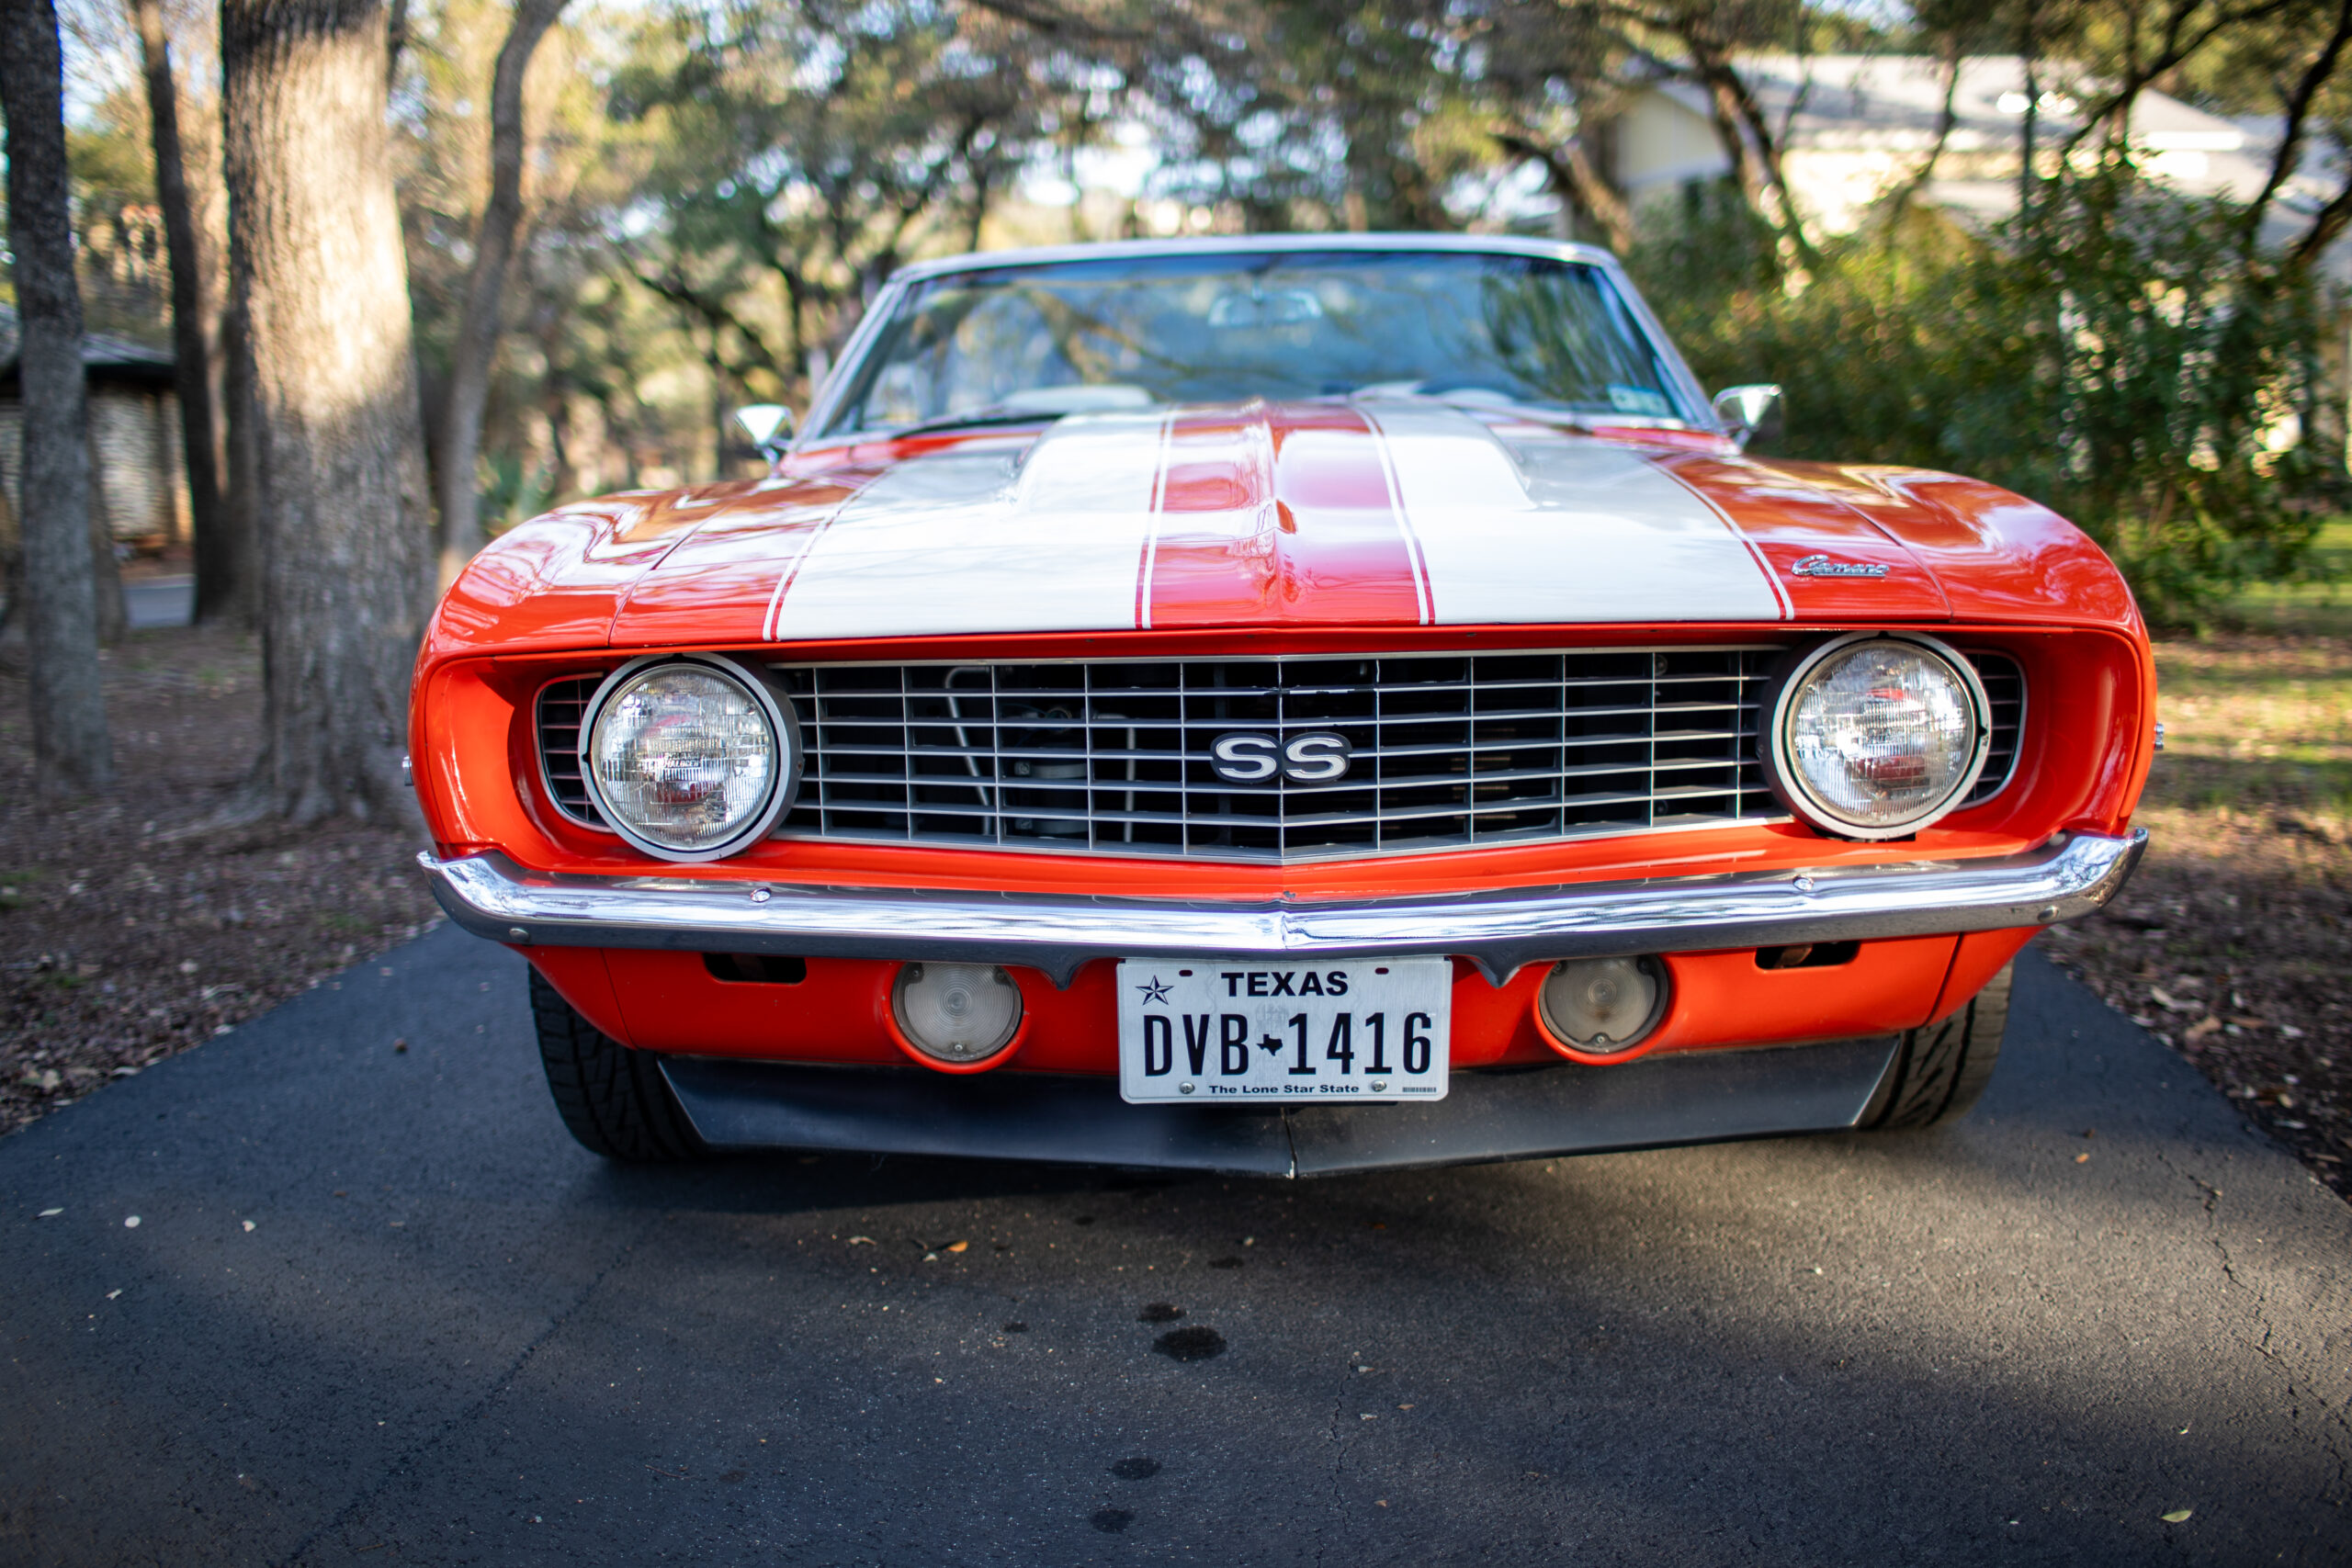 Front view of a red vintage muscle car with white racing stripes and a Texas license plate parked on a driveway.